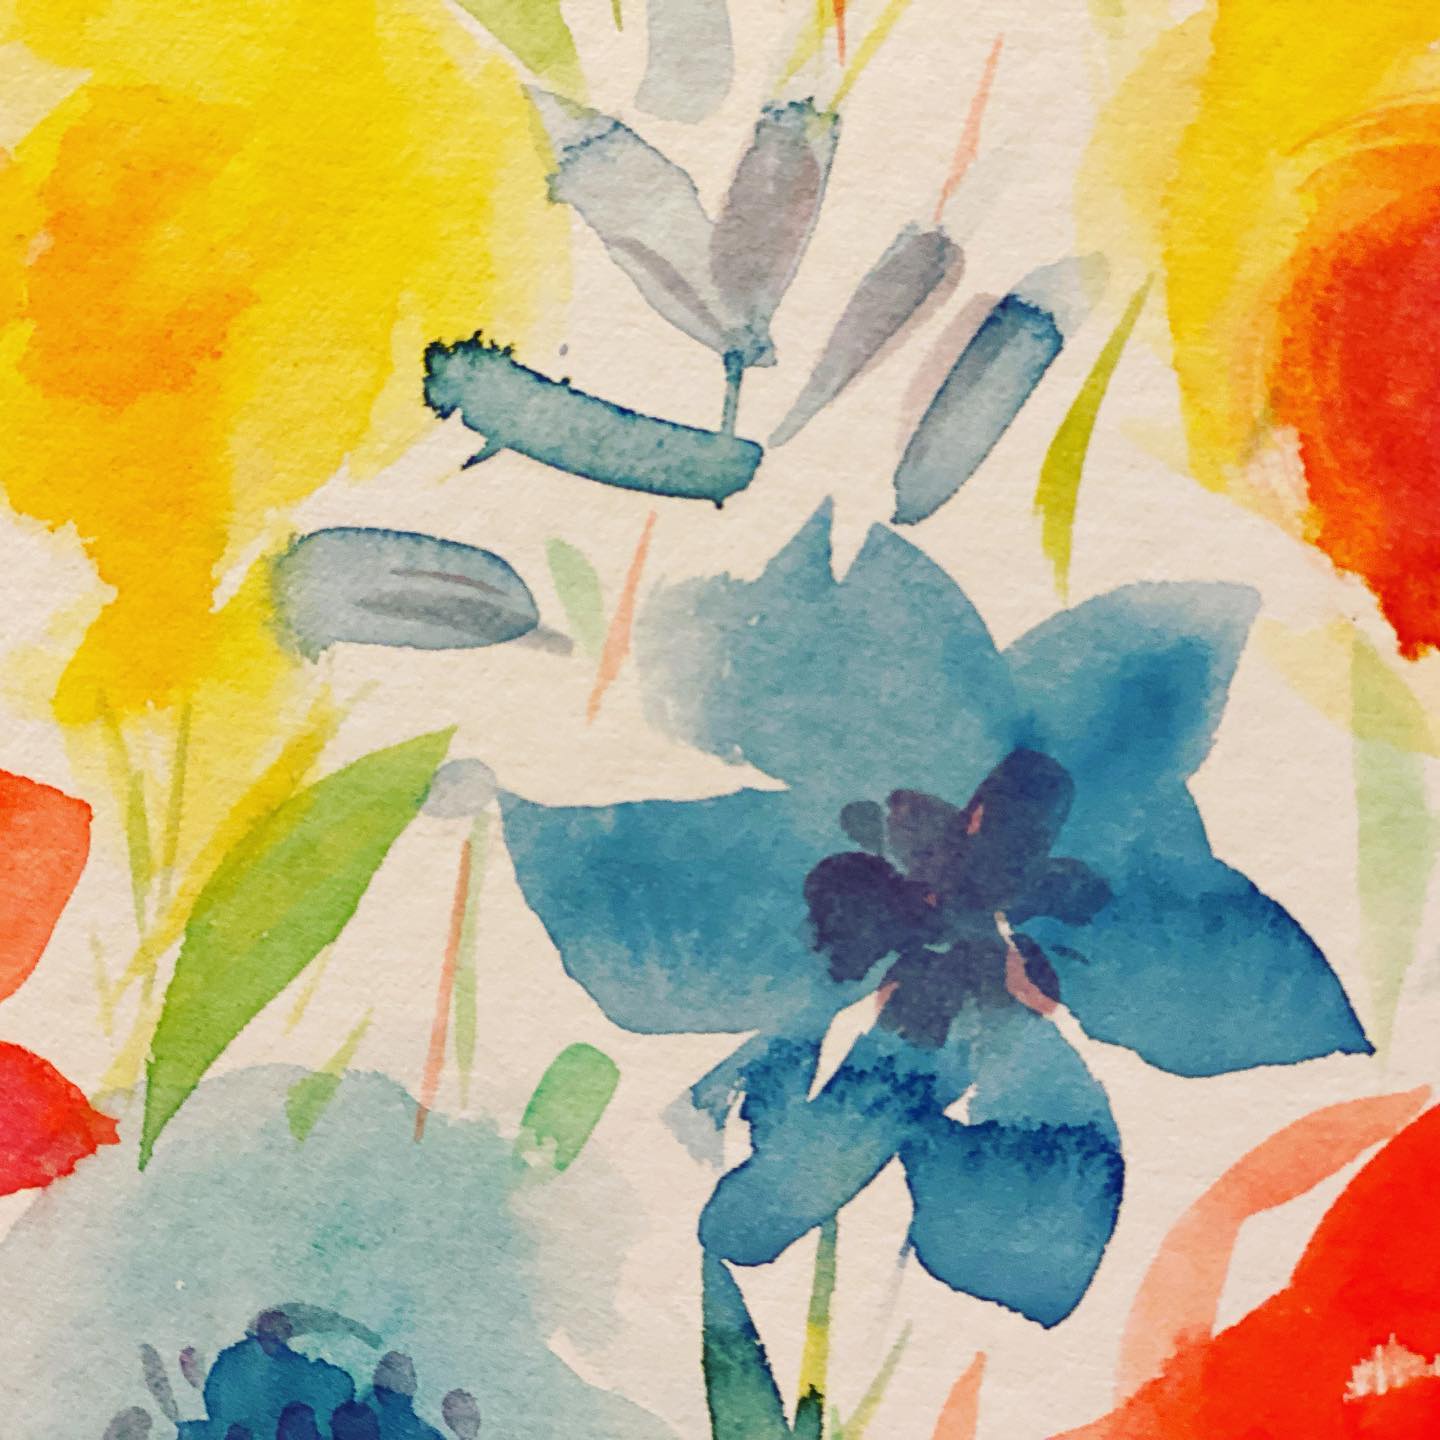 Watercolor florals are so refreshing, always love playing with these kuretake watercolors.